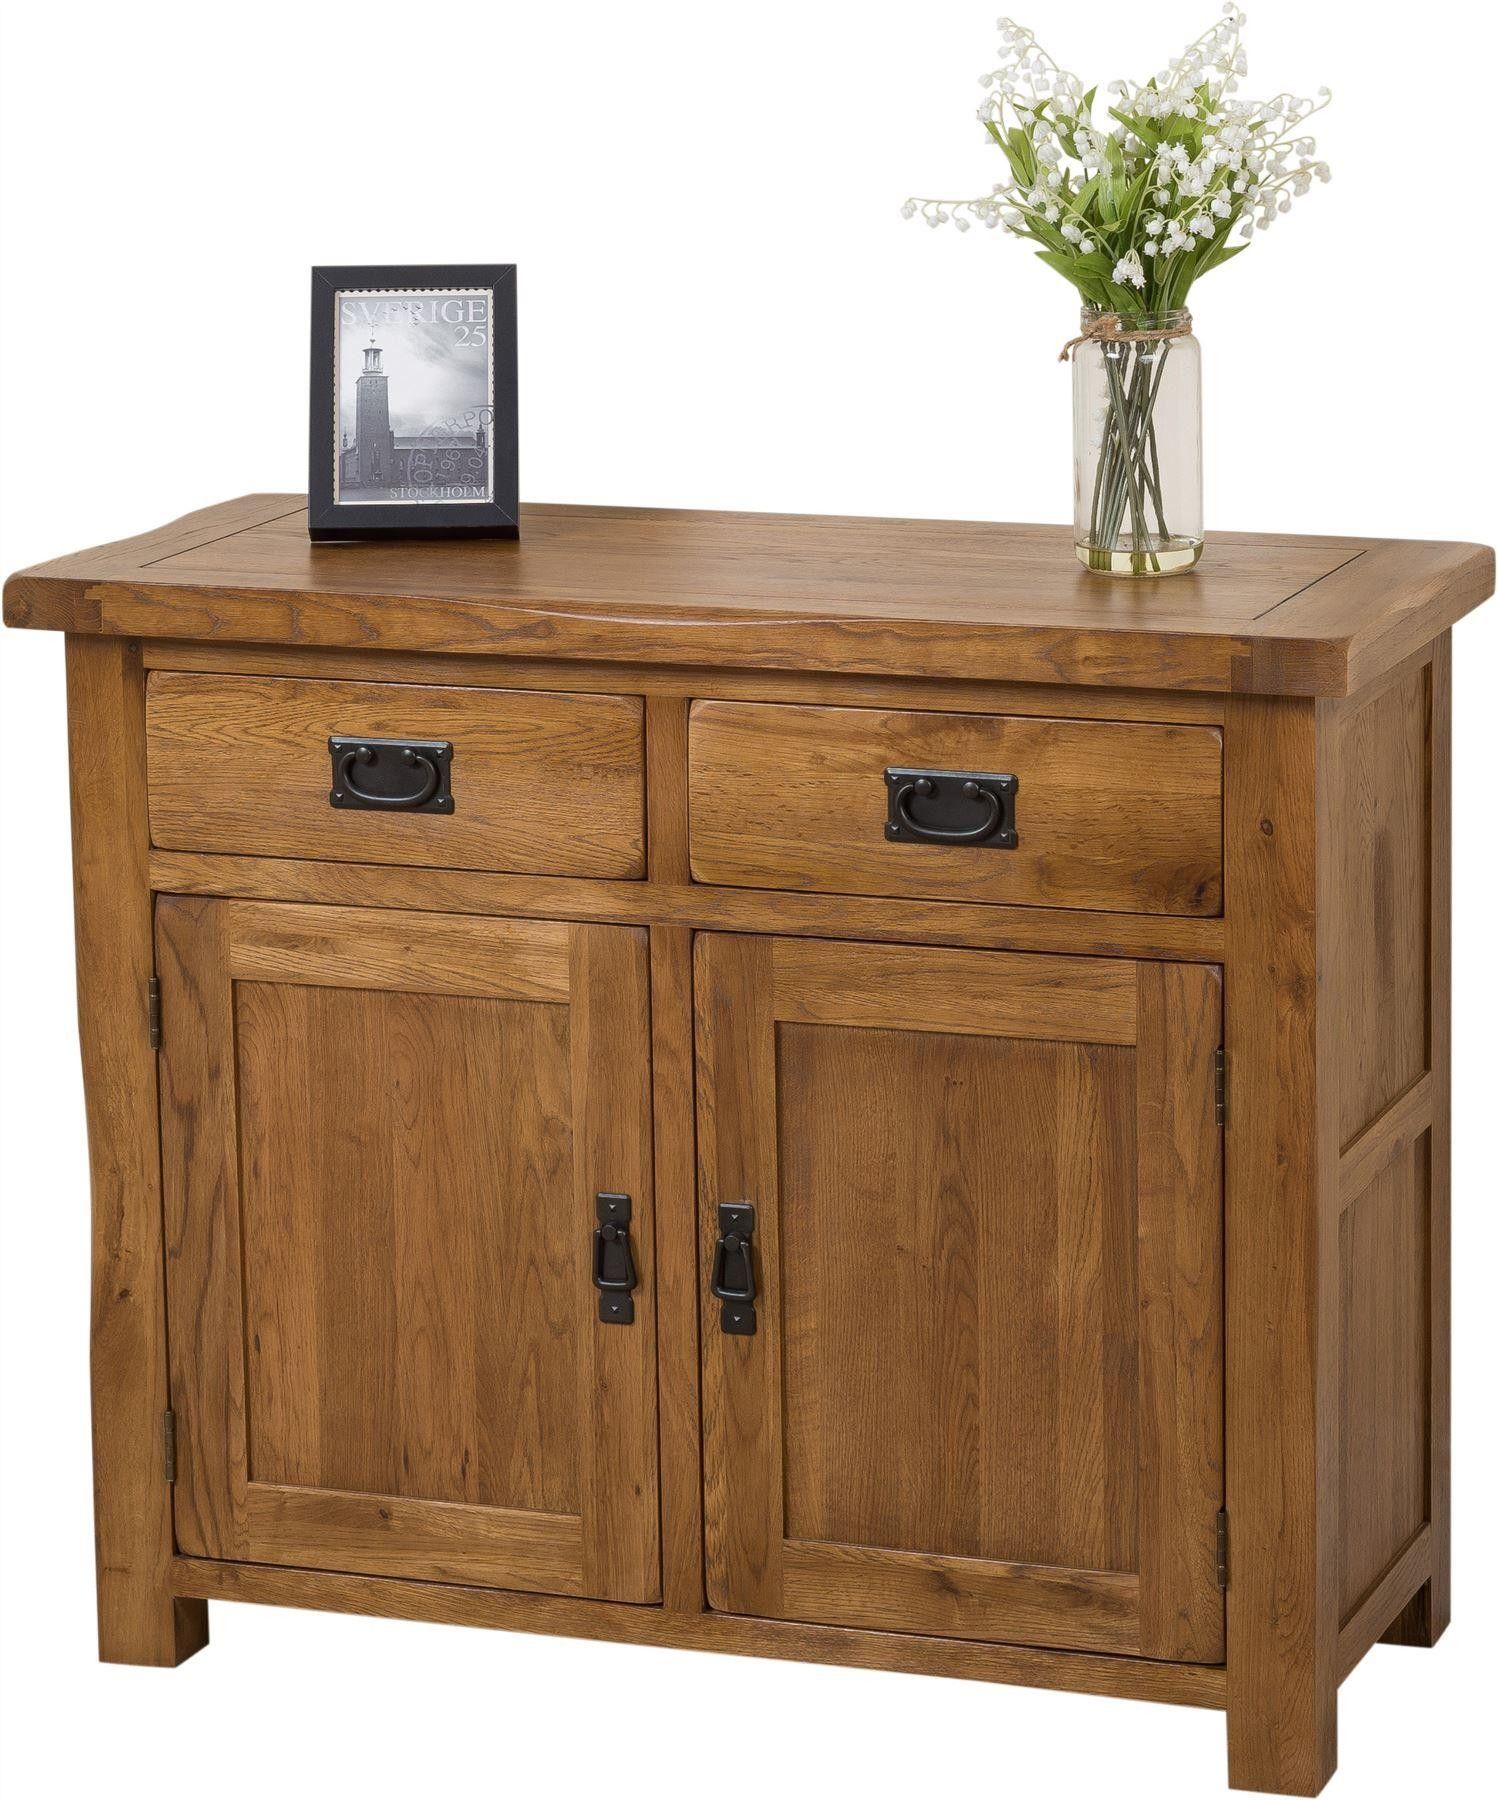 Cotswold Rustic Small Oak Sideboard | Modern Furniture Direct Throughout Rustic Oak Sideboards (Photo 6 of 15)